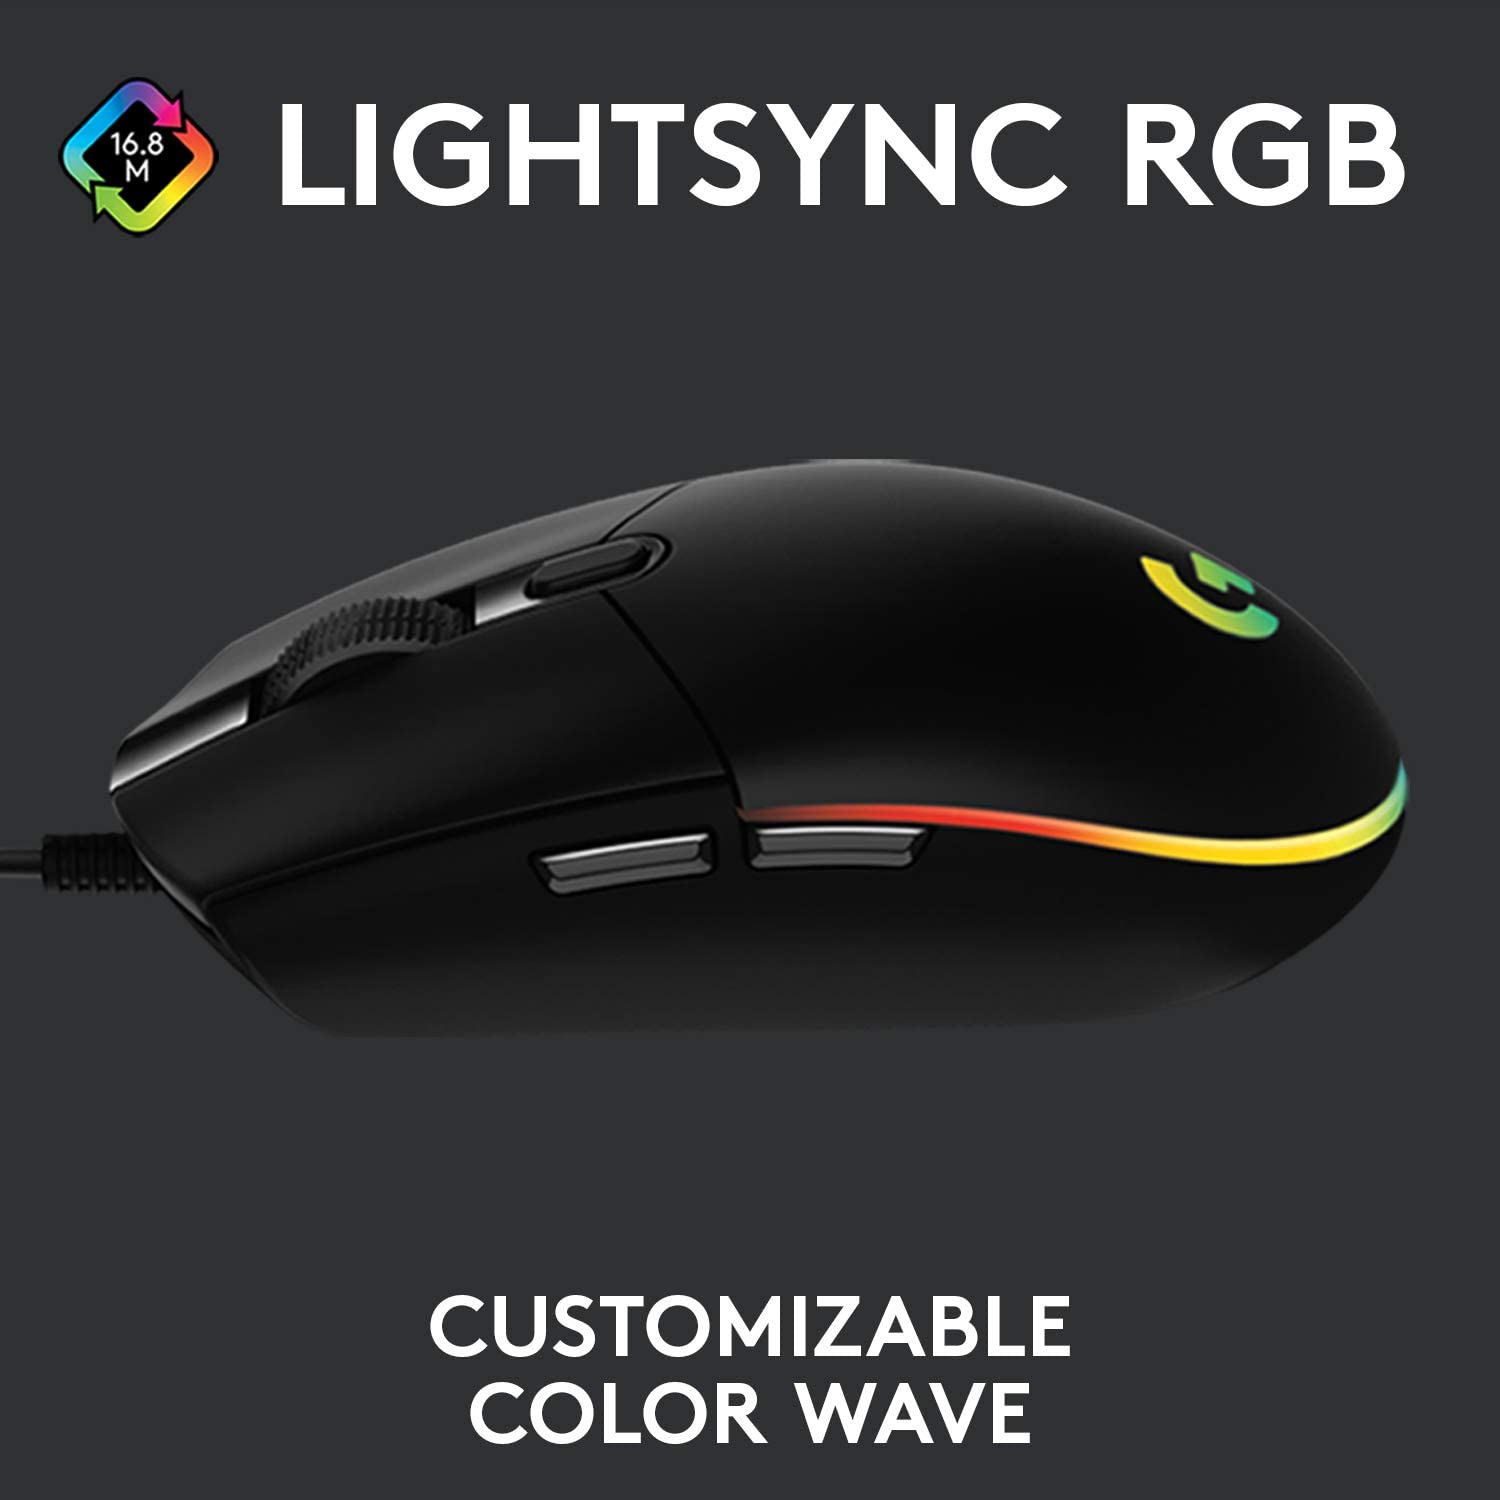 Logitech G203 LIGHTSYNC Wired Gaming Mouse SOHE LIFE #1 LIFESTYLE GADGET STORE E-COMMERCE SINGAPORE